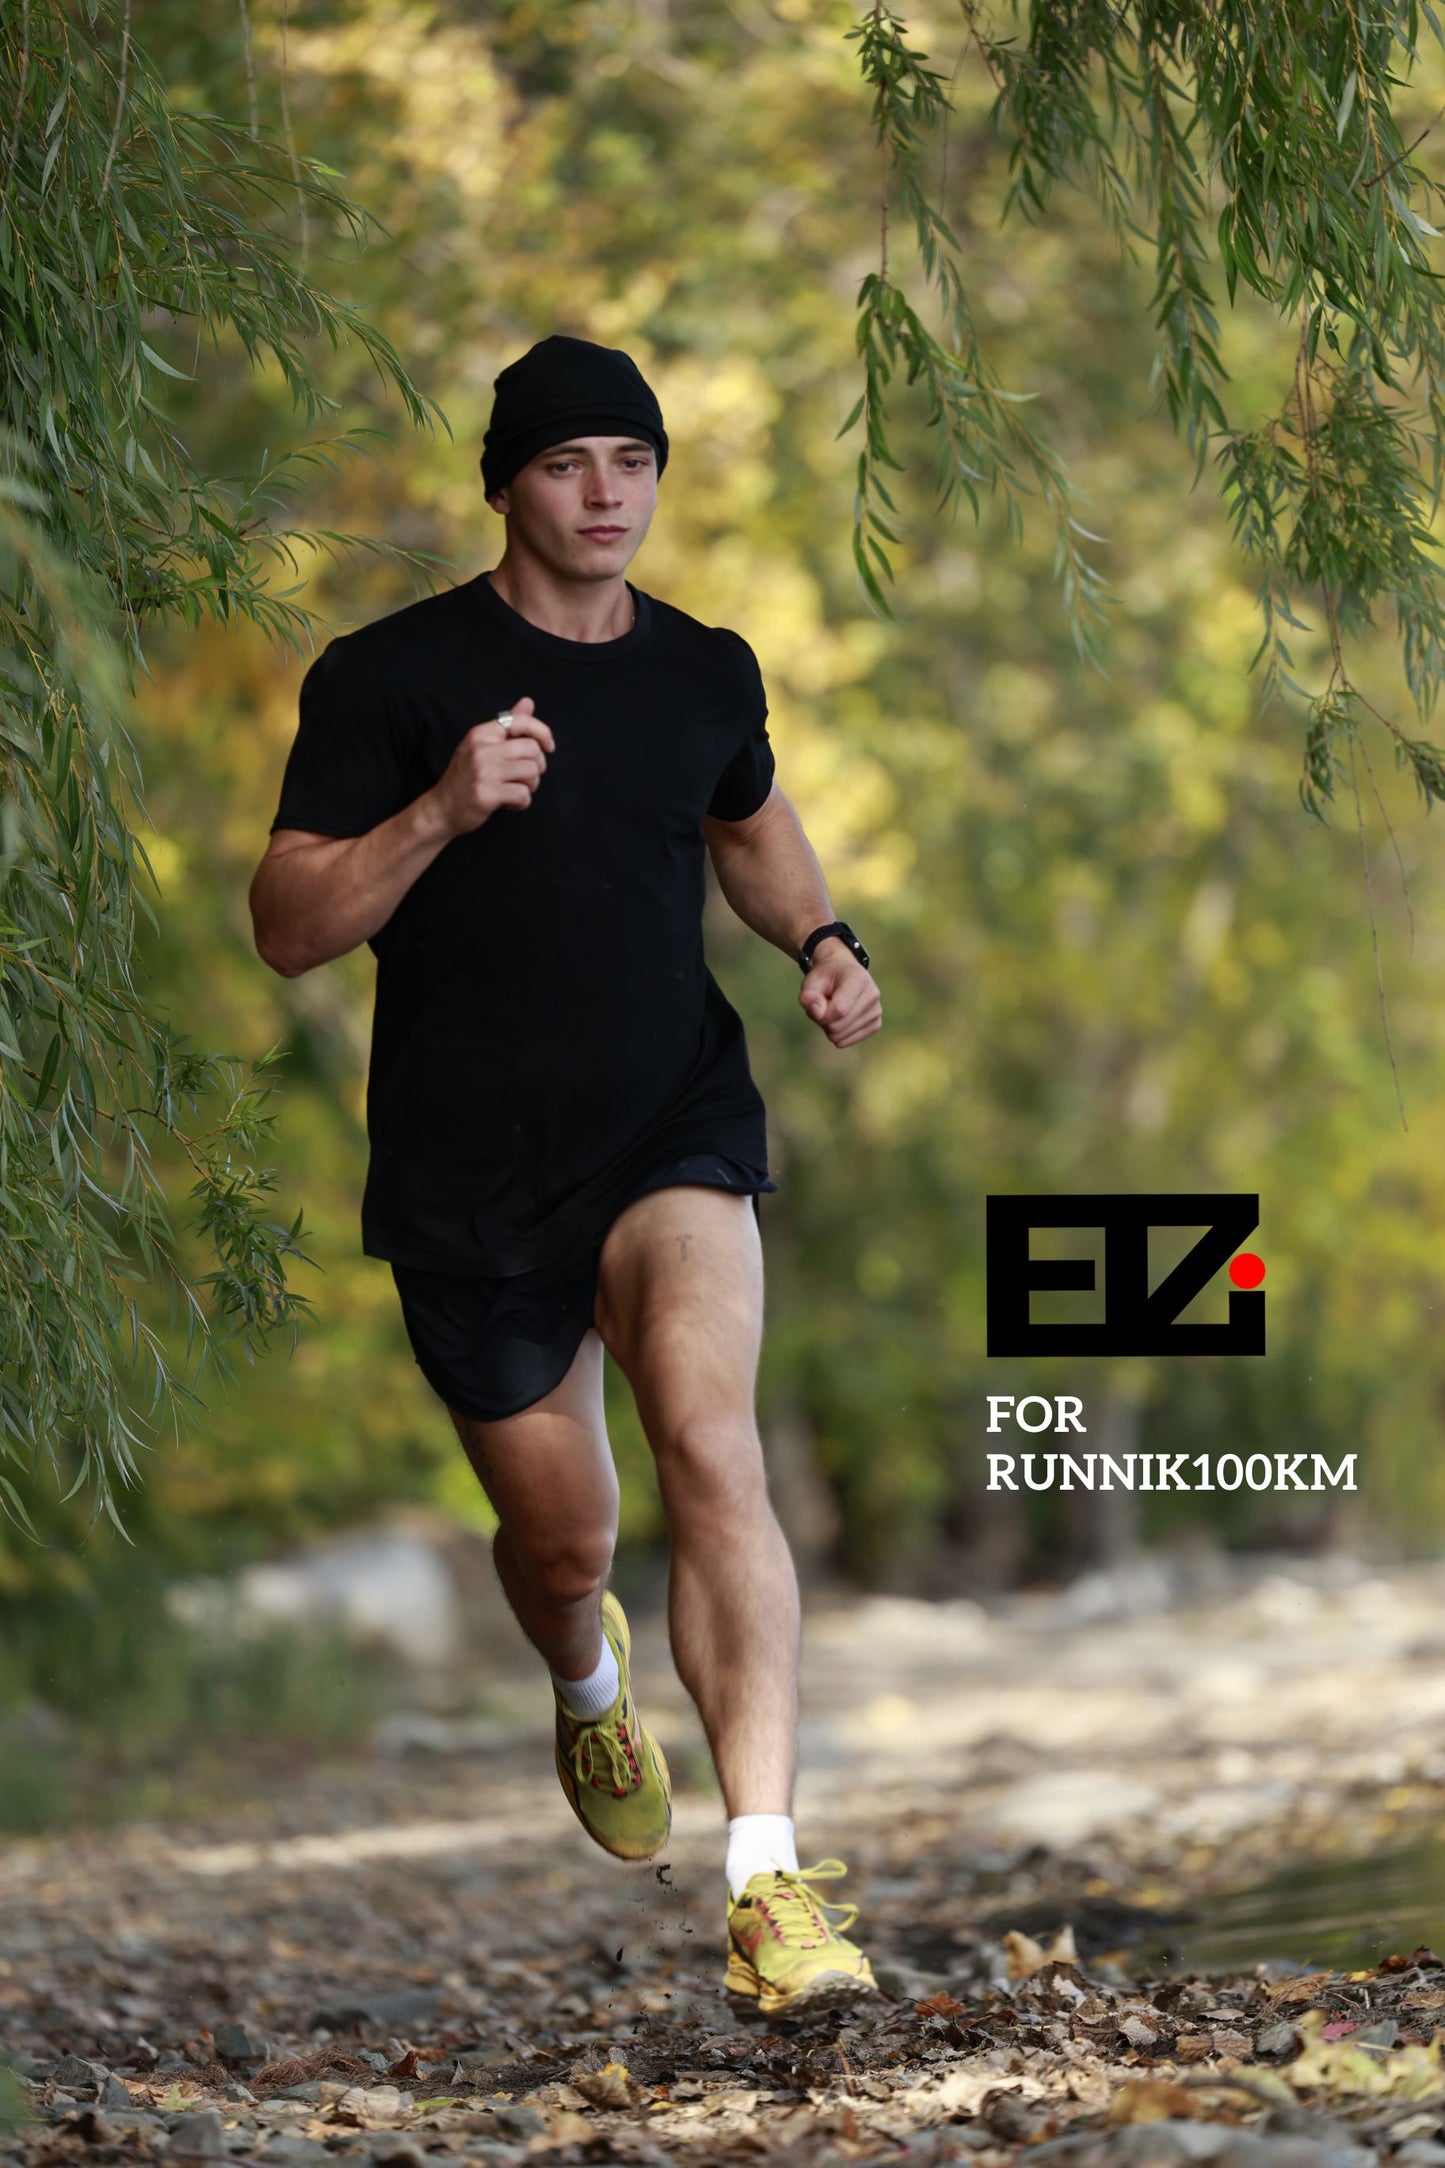 ELZI for runnik100km t-shirt. Black Merino Wool T-shirt for ultra runners. Zero chafing, no itchiness. Trail Runs in Montreal. Running by the st-lawrence river.  Photography by Jonathan Brunelle.